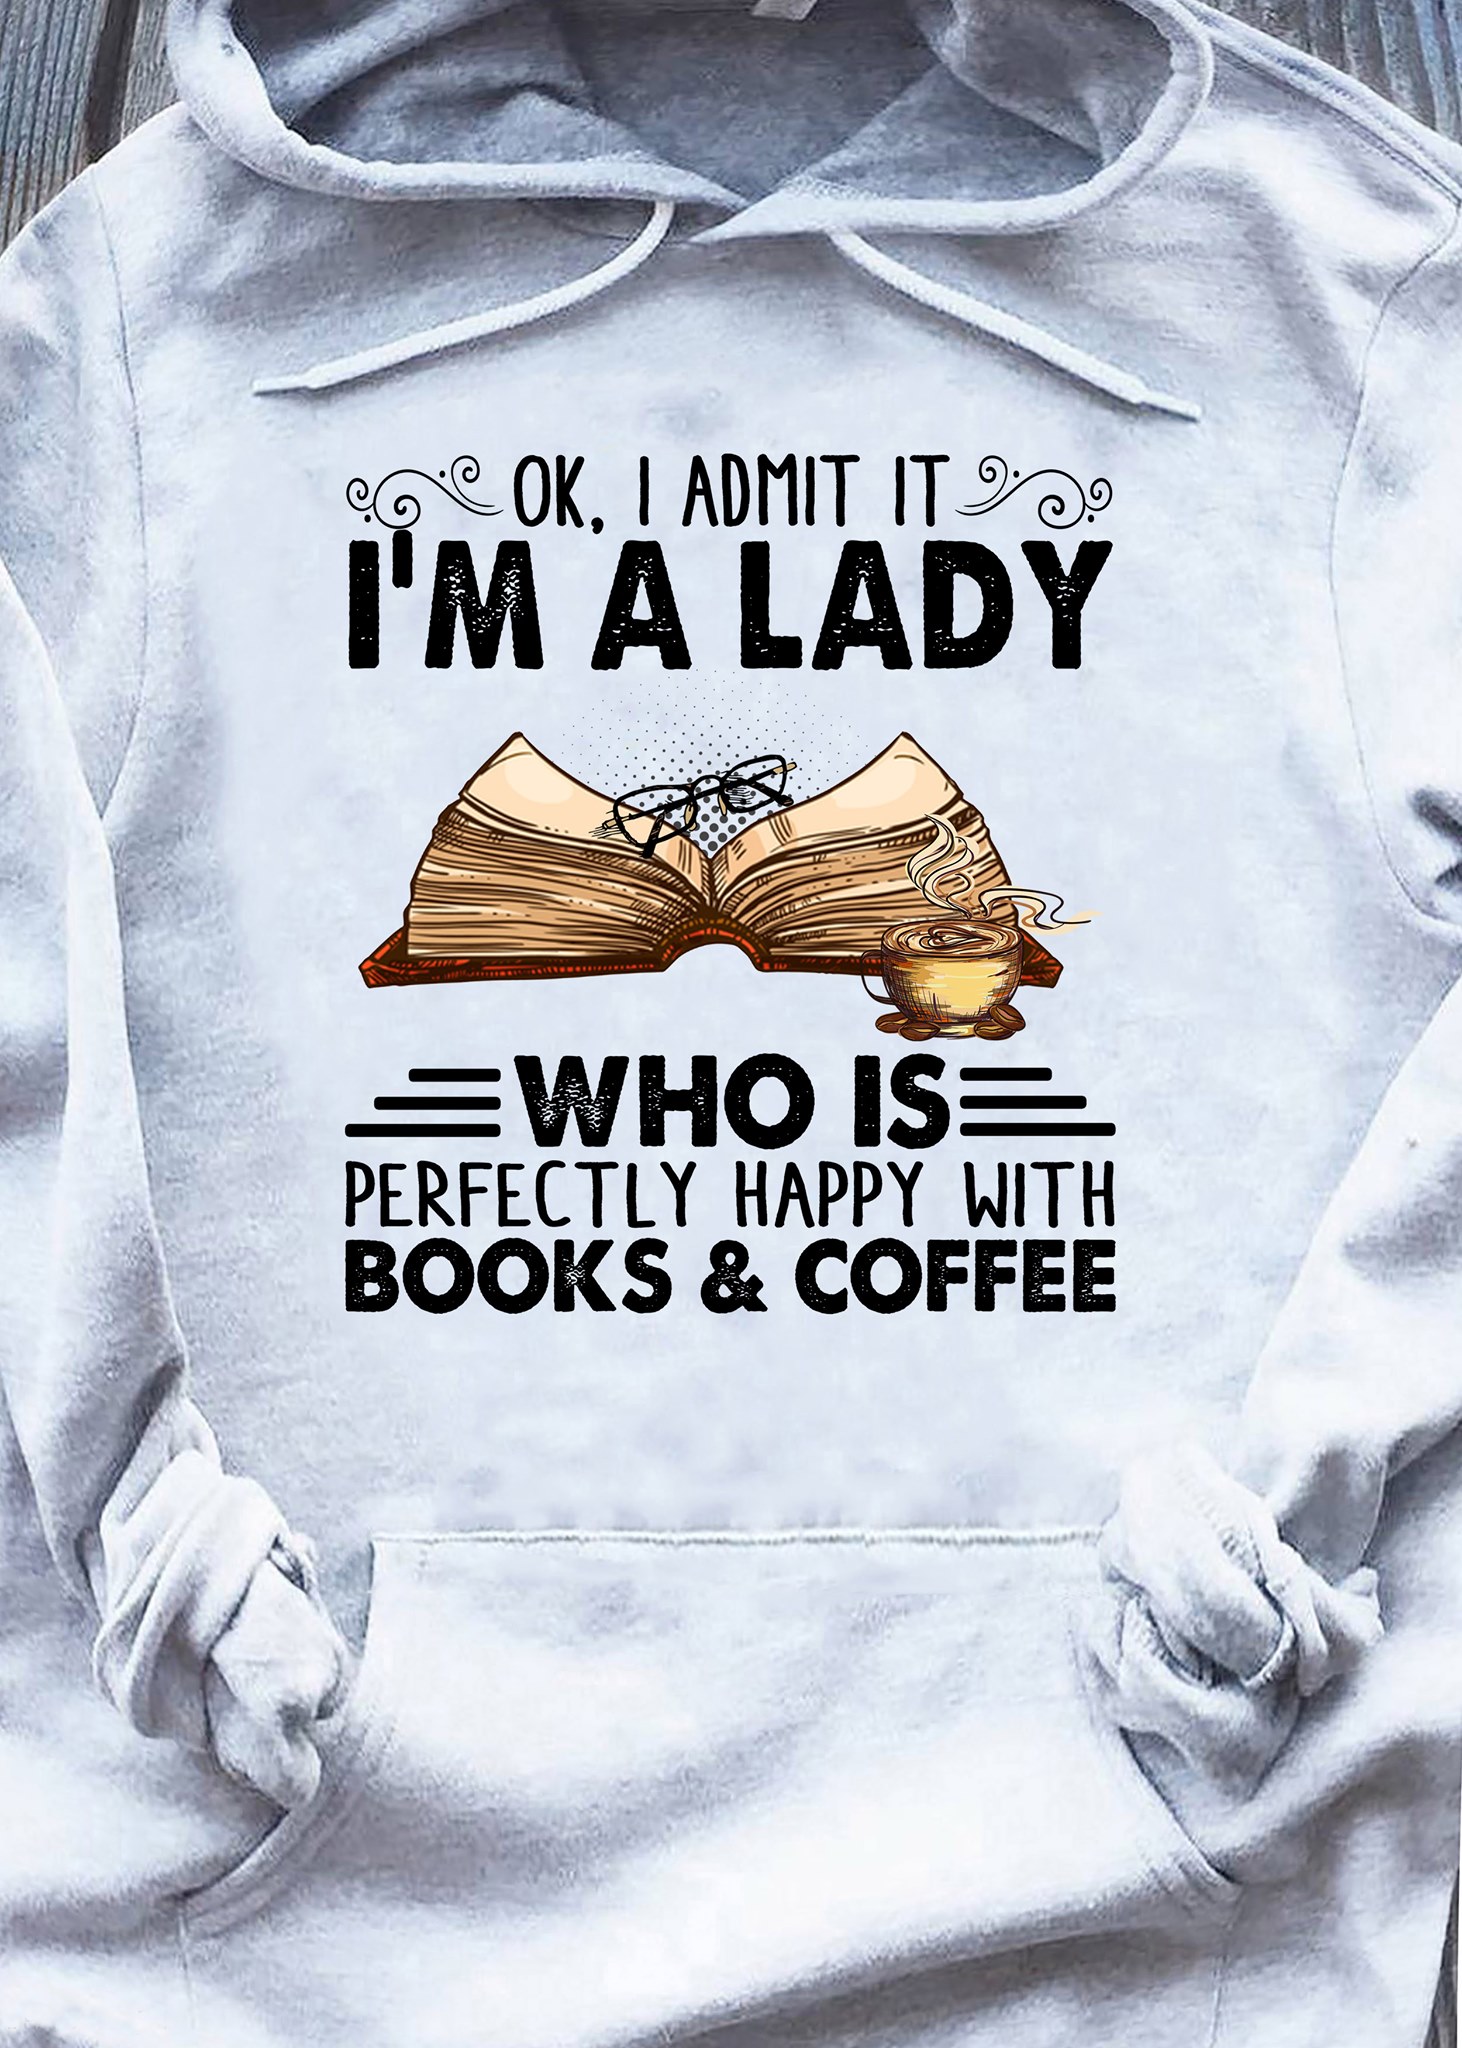 Ok, I'm admit it i'm a lady who is perfectly happy with book & coffee